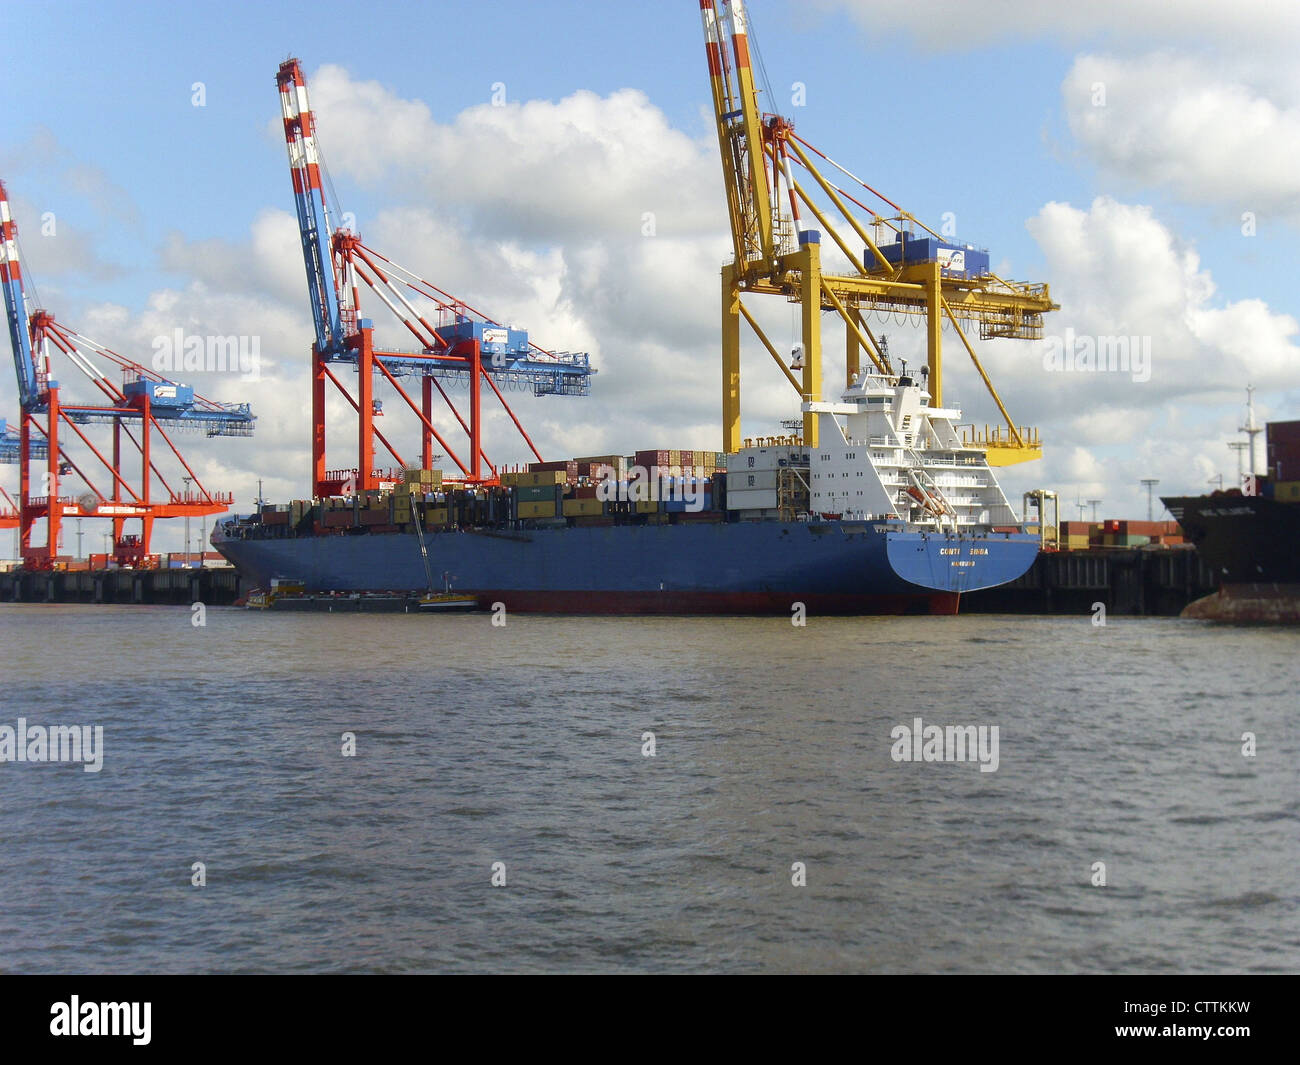 The container ship '''Conti Singa''' at the container terminal of Bremerhaven, Germany Stock Photo